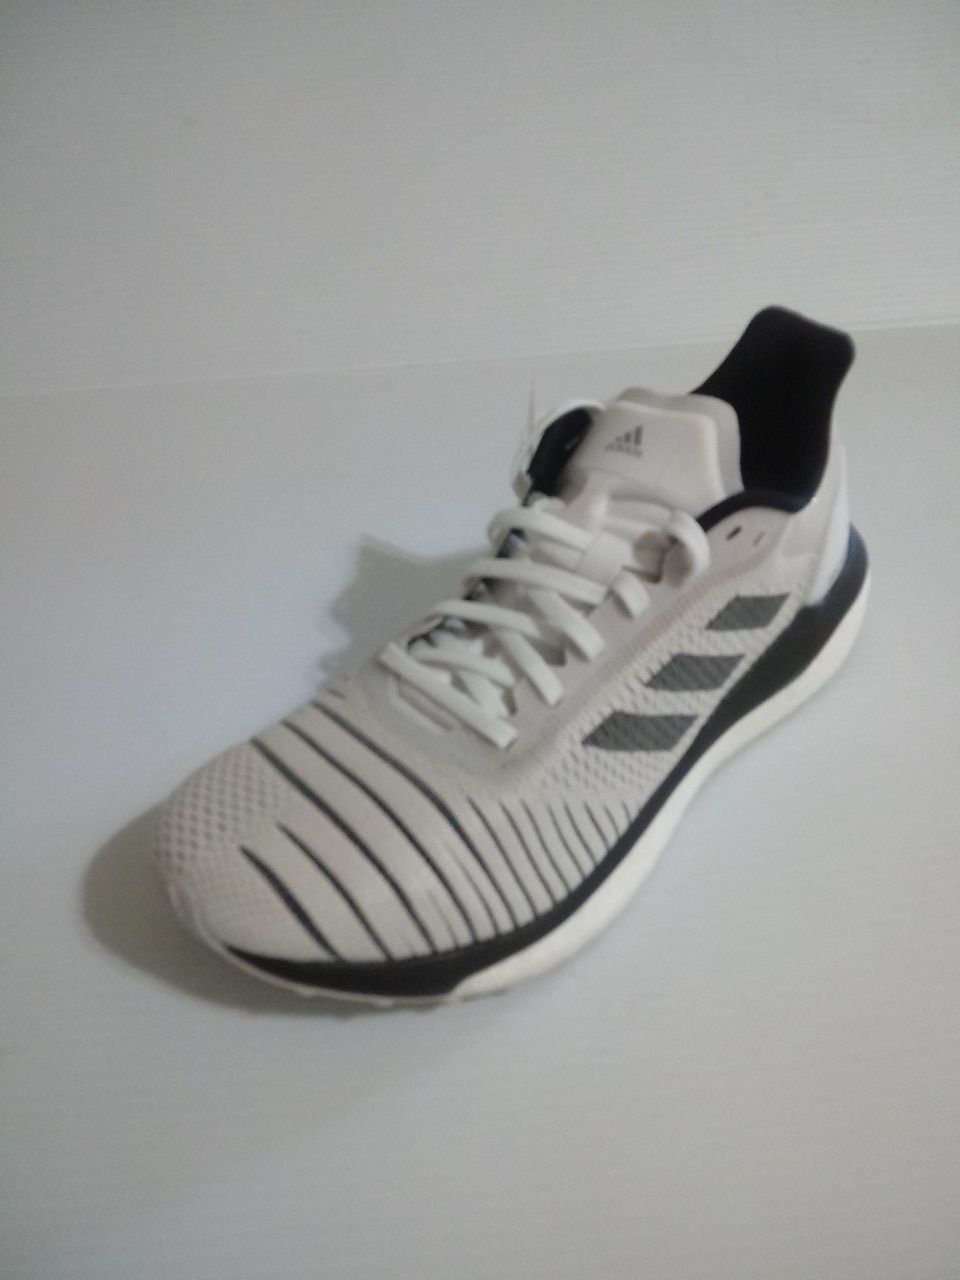 Adidas solarboost for women